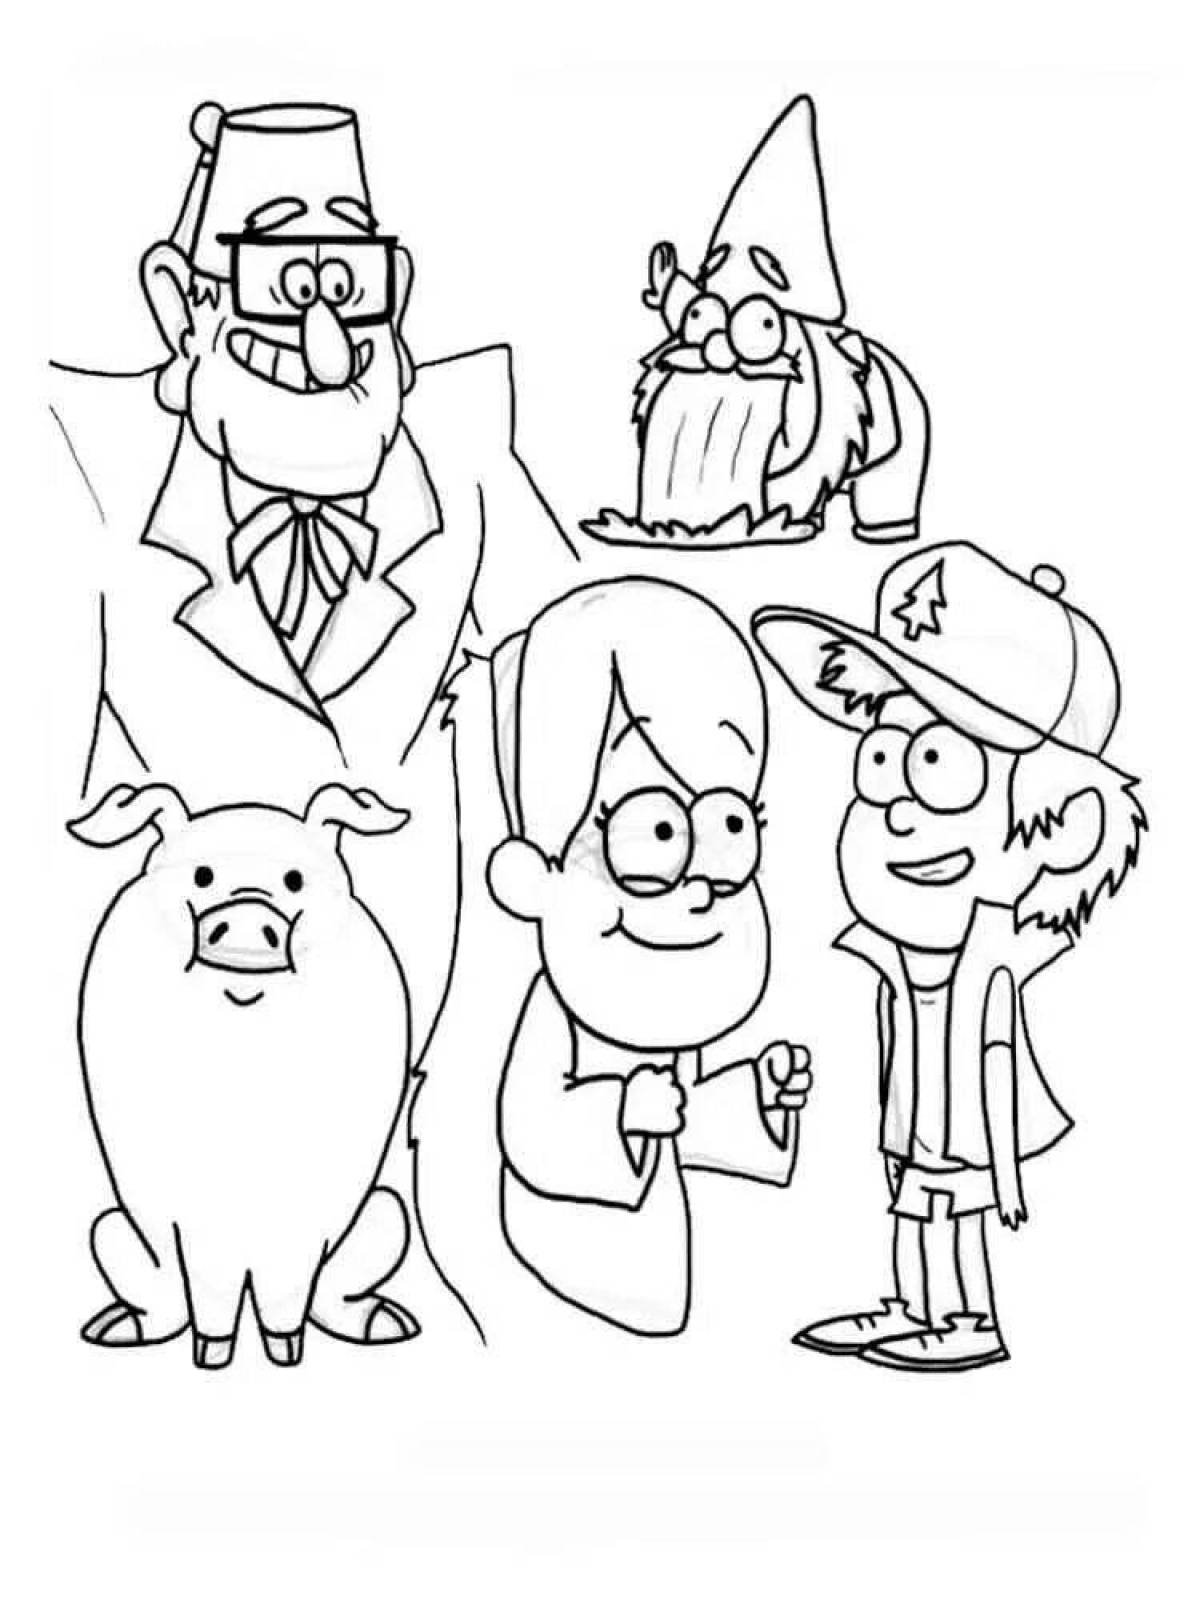 Awesome heroes of gravity falls